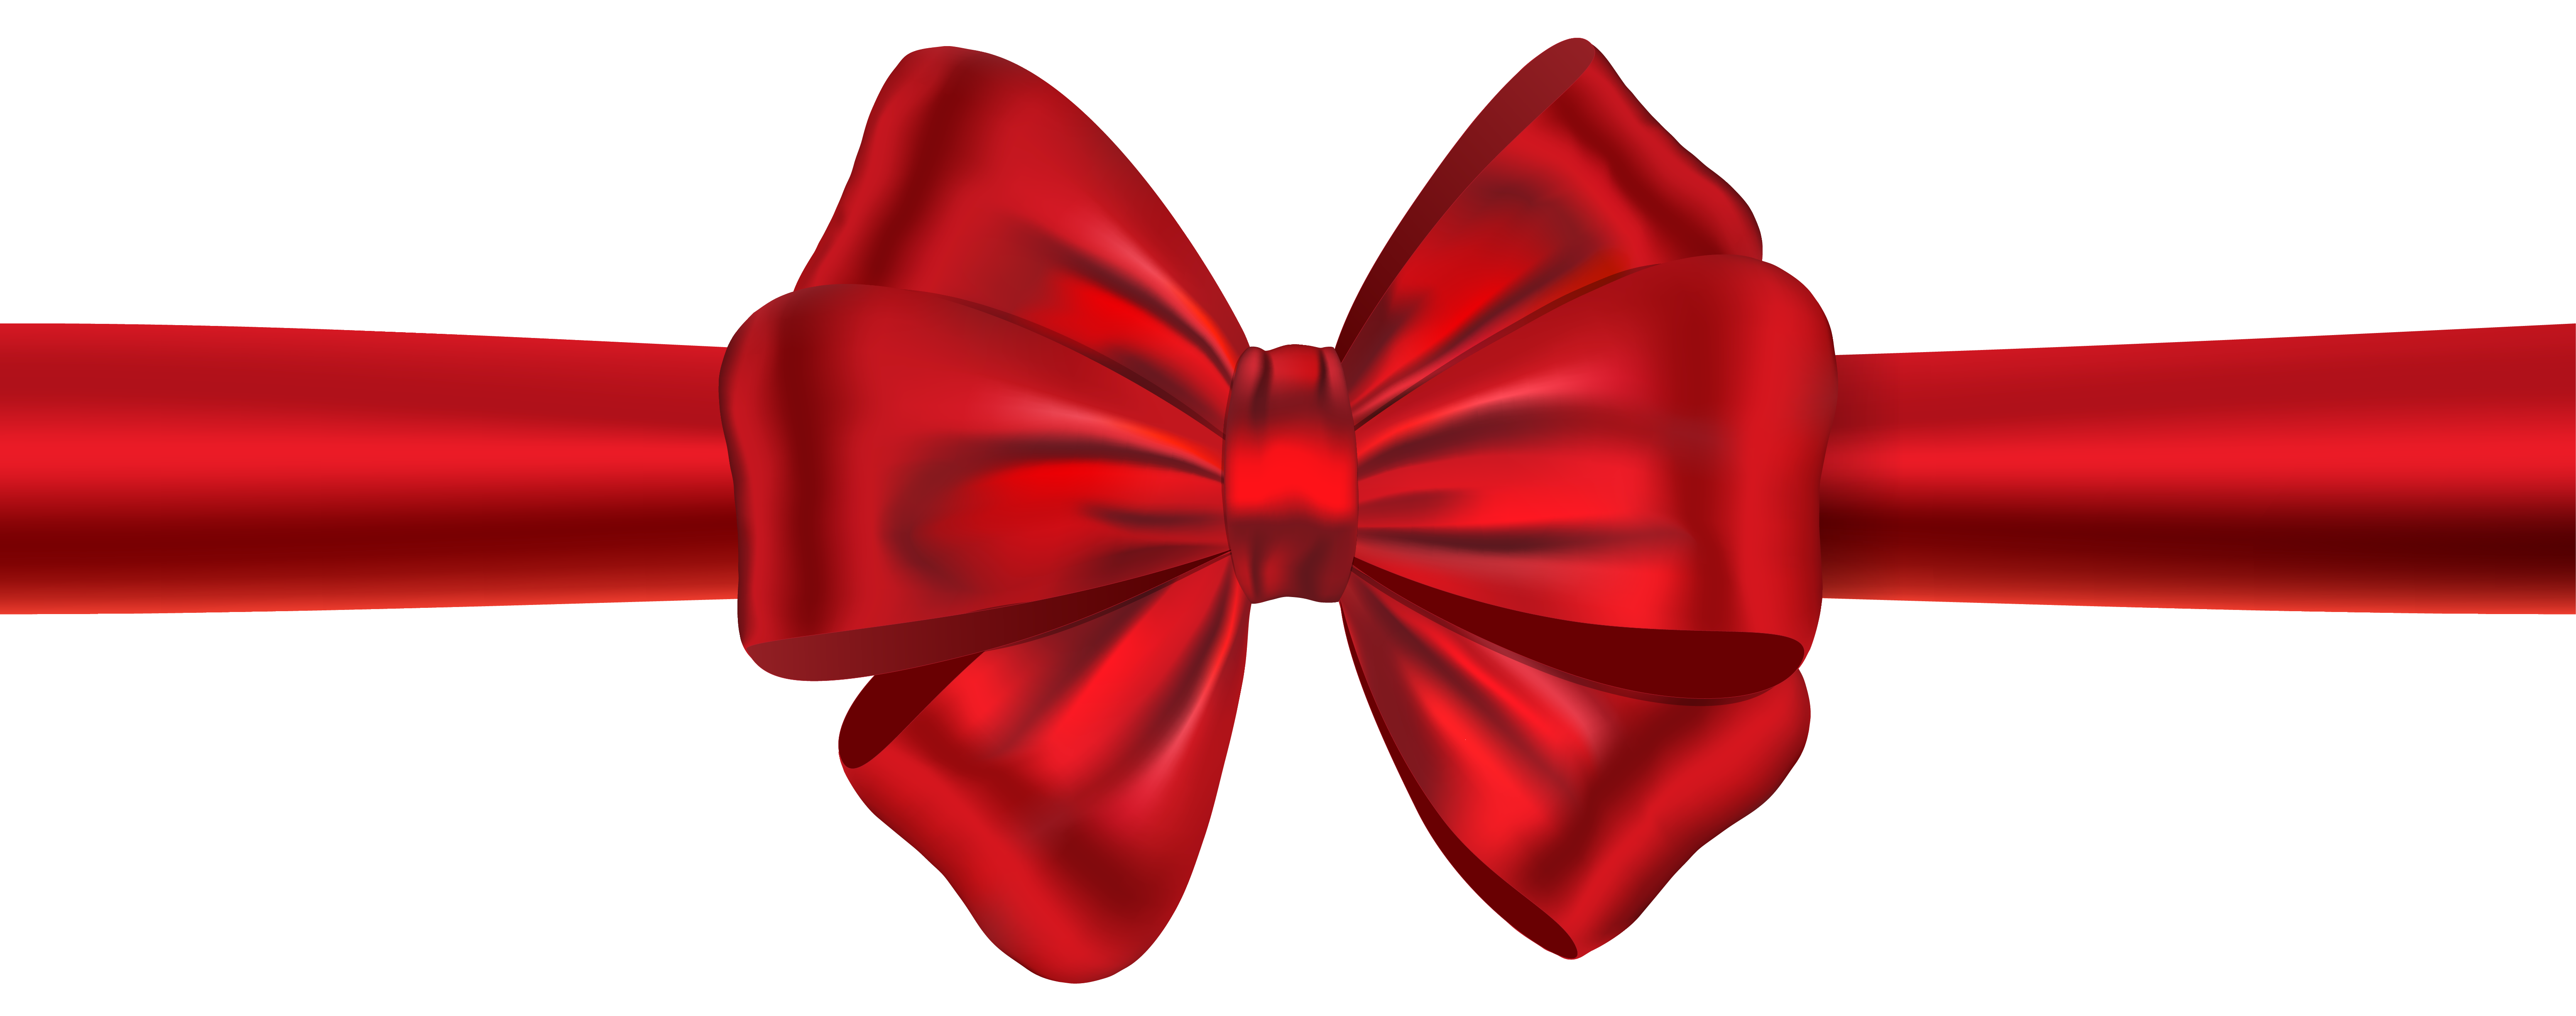 Cute Red Ribbon Hair Bow Tie Watercolour Illustration, Red, Ribbon, Bow PNG  Transparent Image and Clipart for Free Download